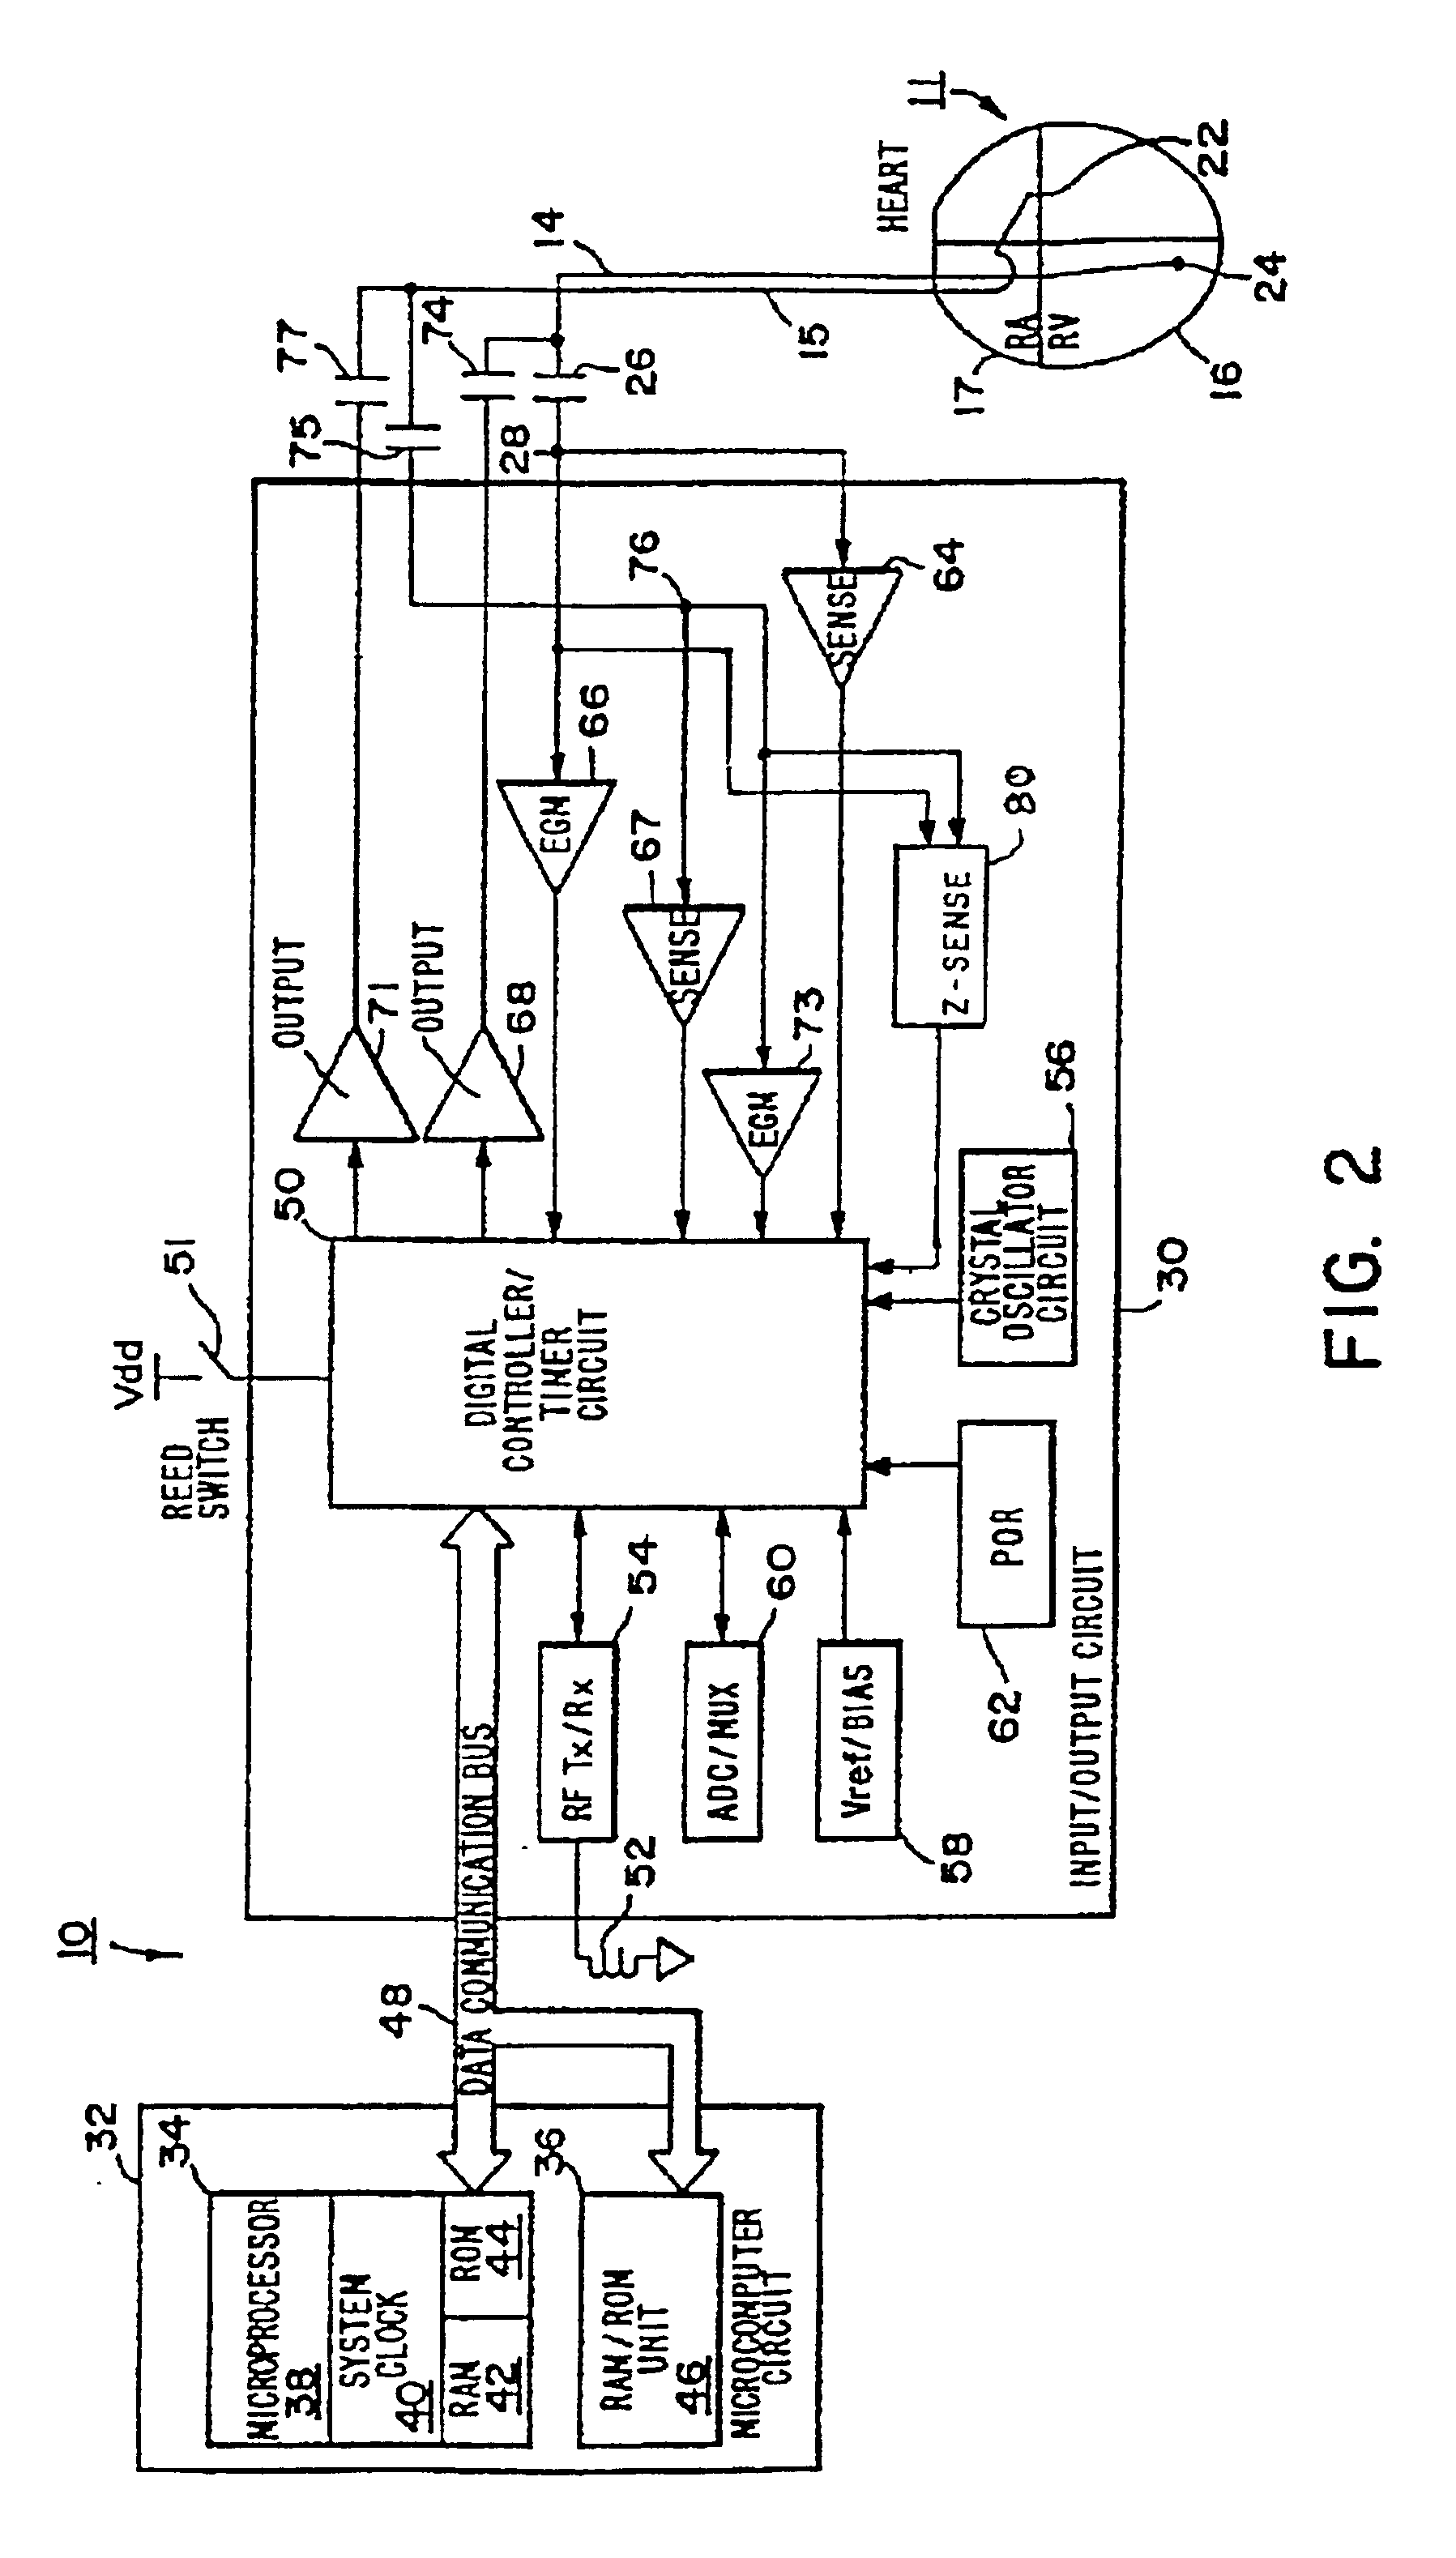 Methods and apparatus for detection and treatment of syncope